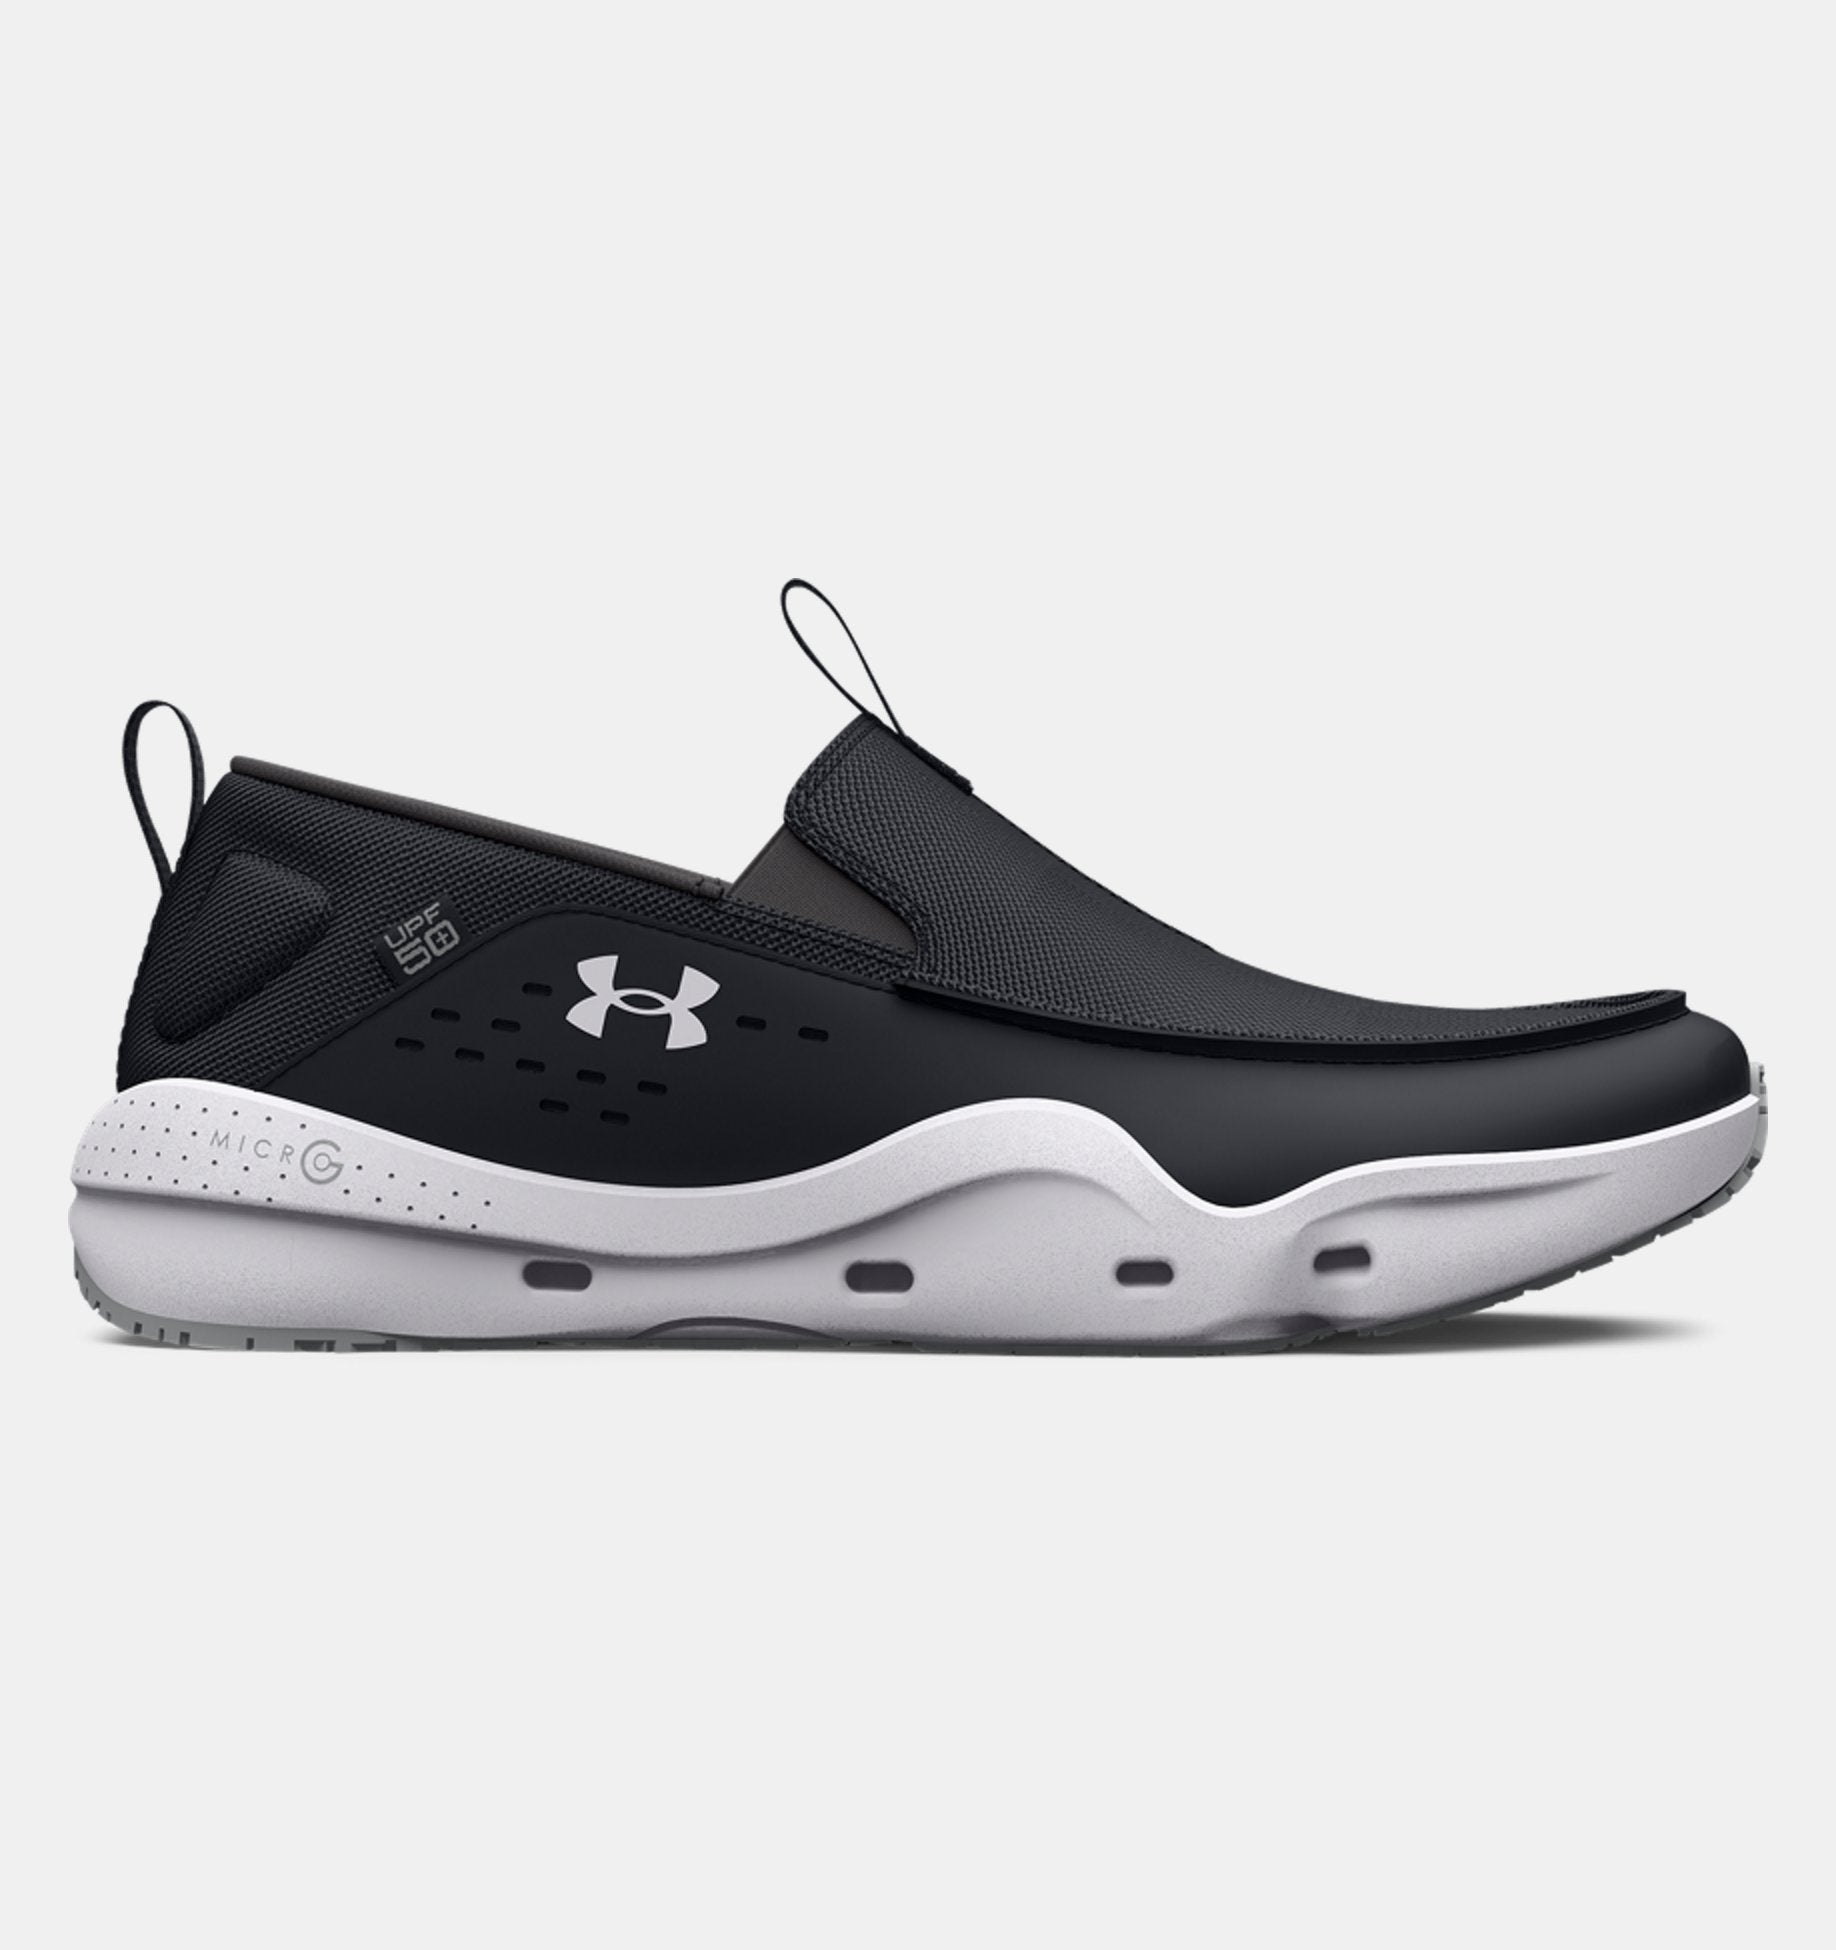 Under Armour Micro G Kilchis Slip Recover Fishing  - Mens